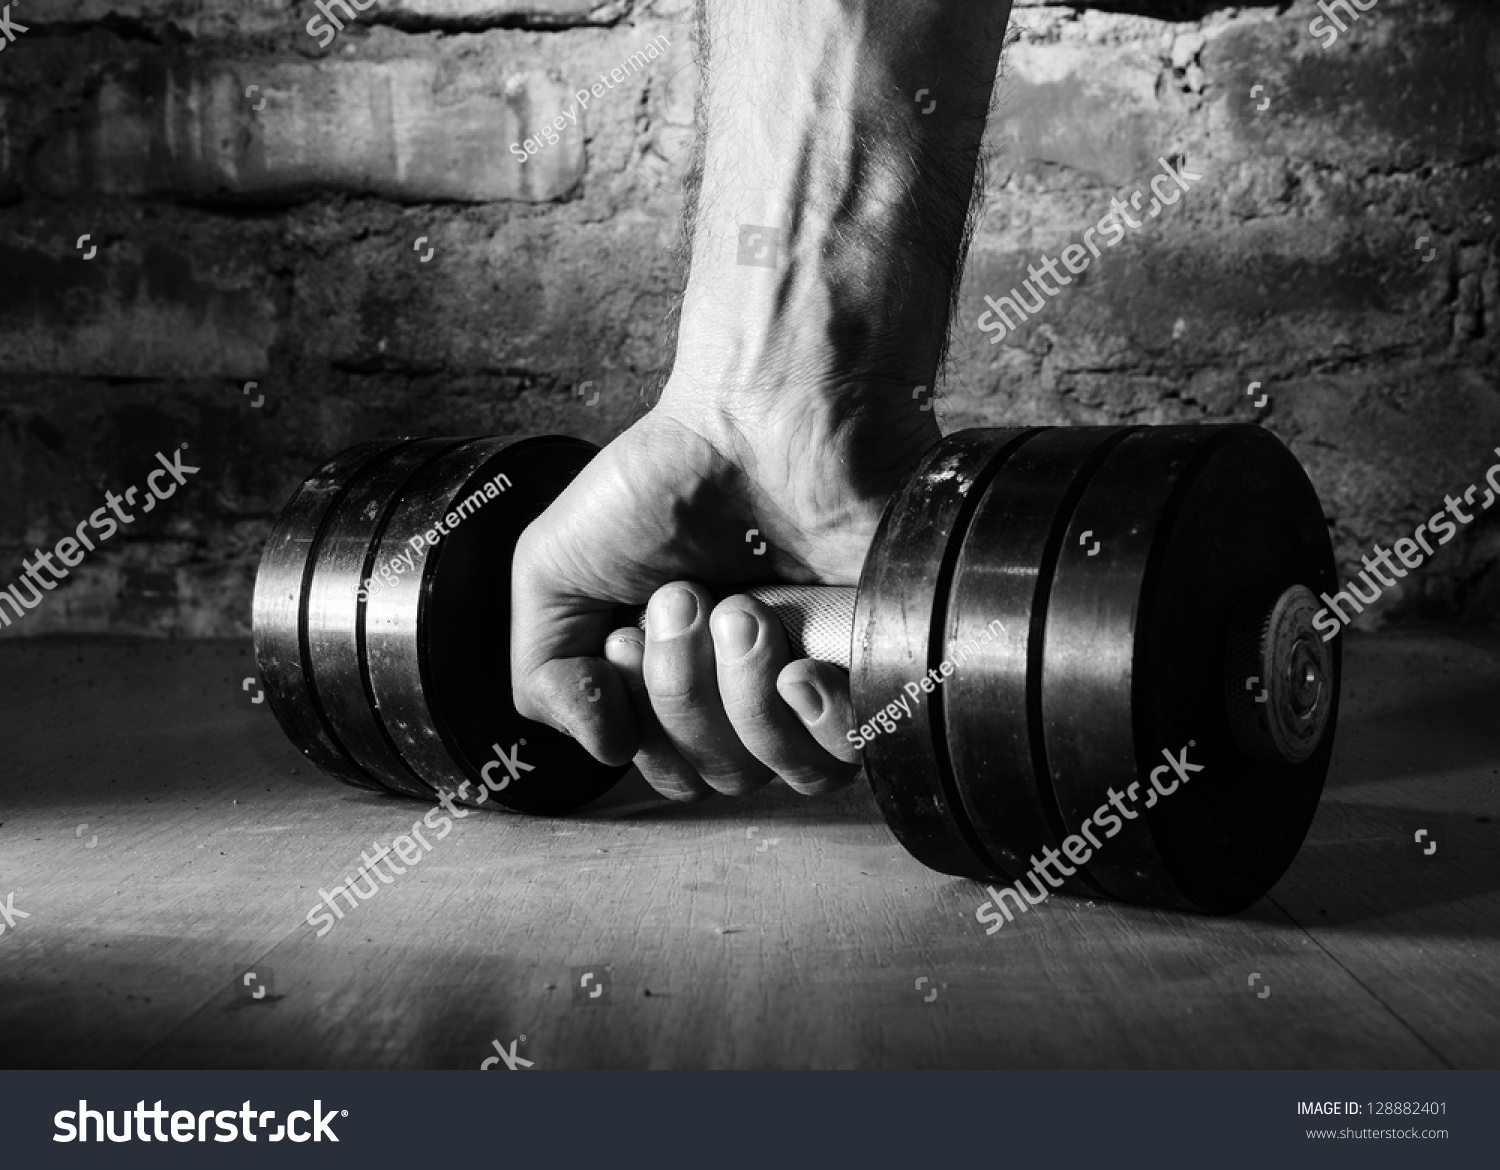 male hand is holding metal barbell against brick wall #128882401